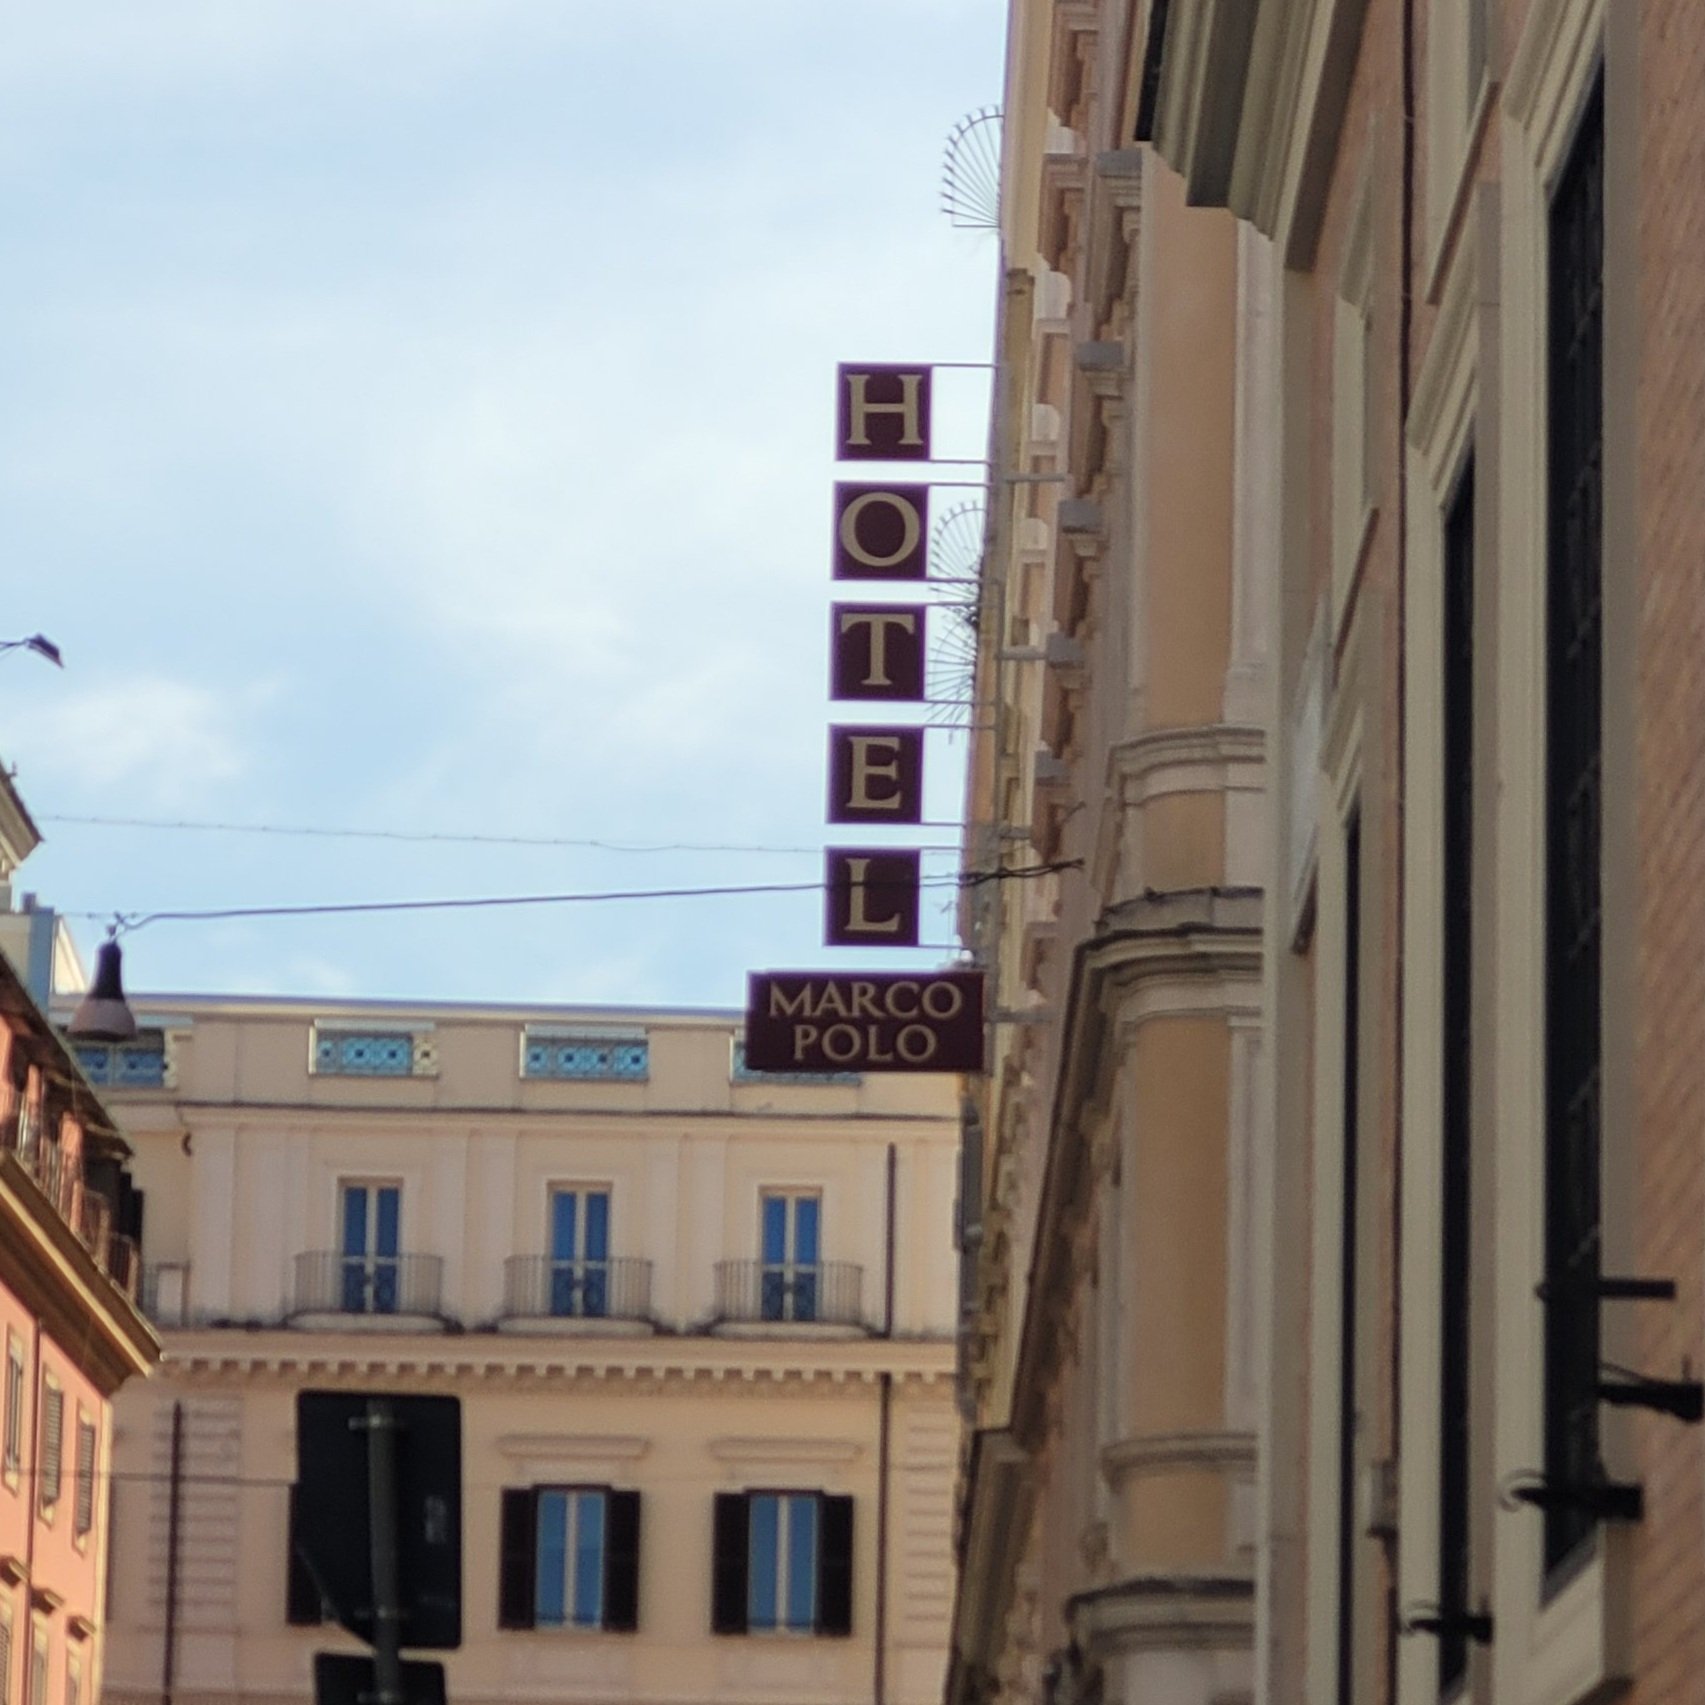 districts in rome italy - Hotel Marco Polo